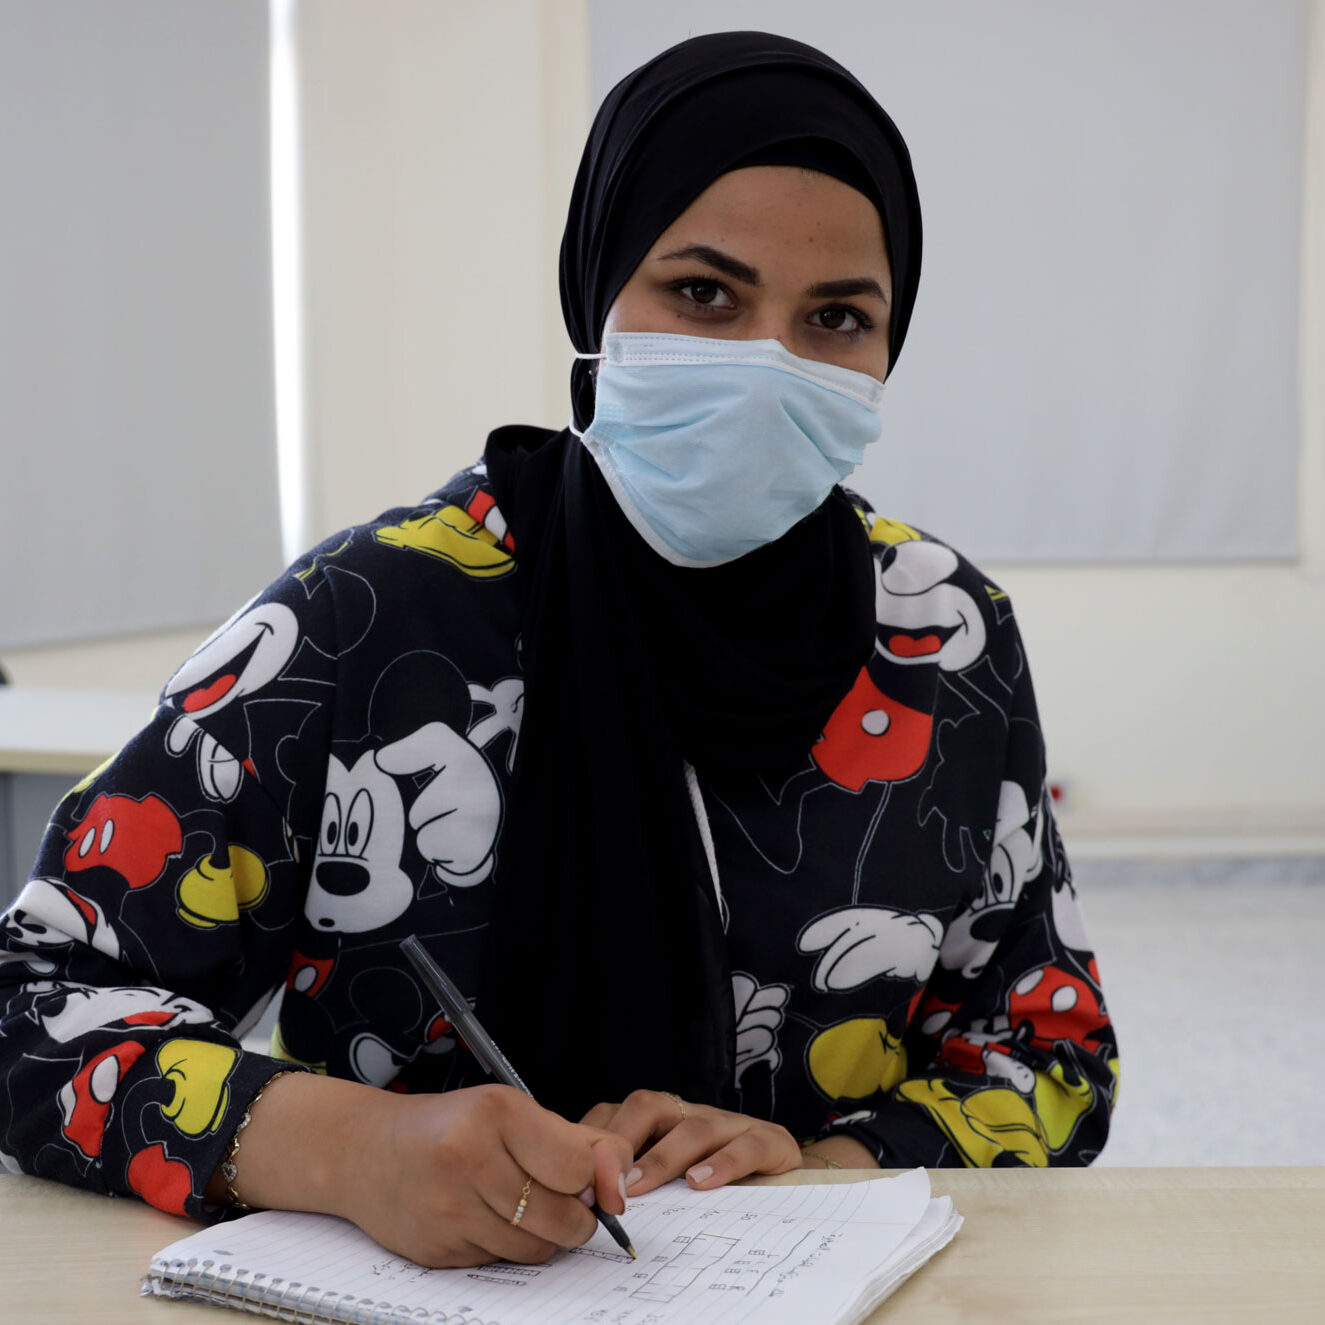 Batoul Al Ahmad says "Girls and women in the camp will feel safer if another woman repairs their phone because of the private content and personal photos on their phone."